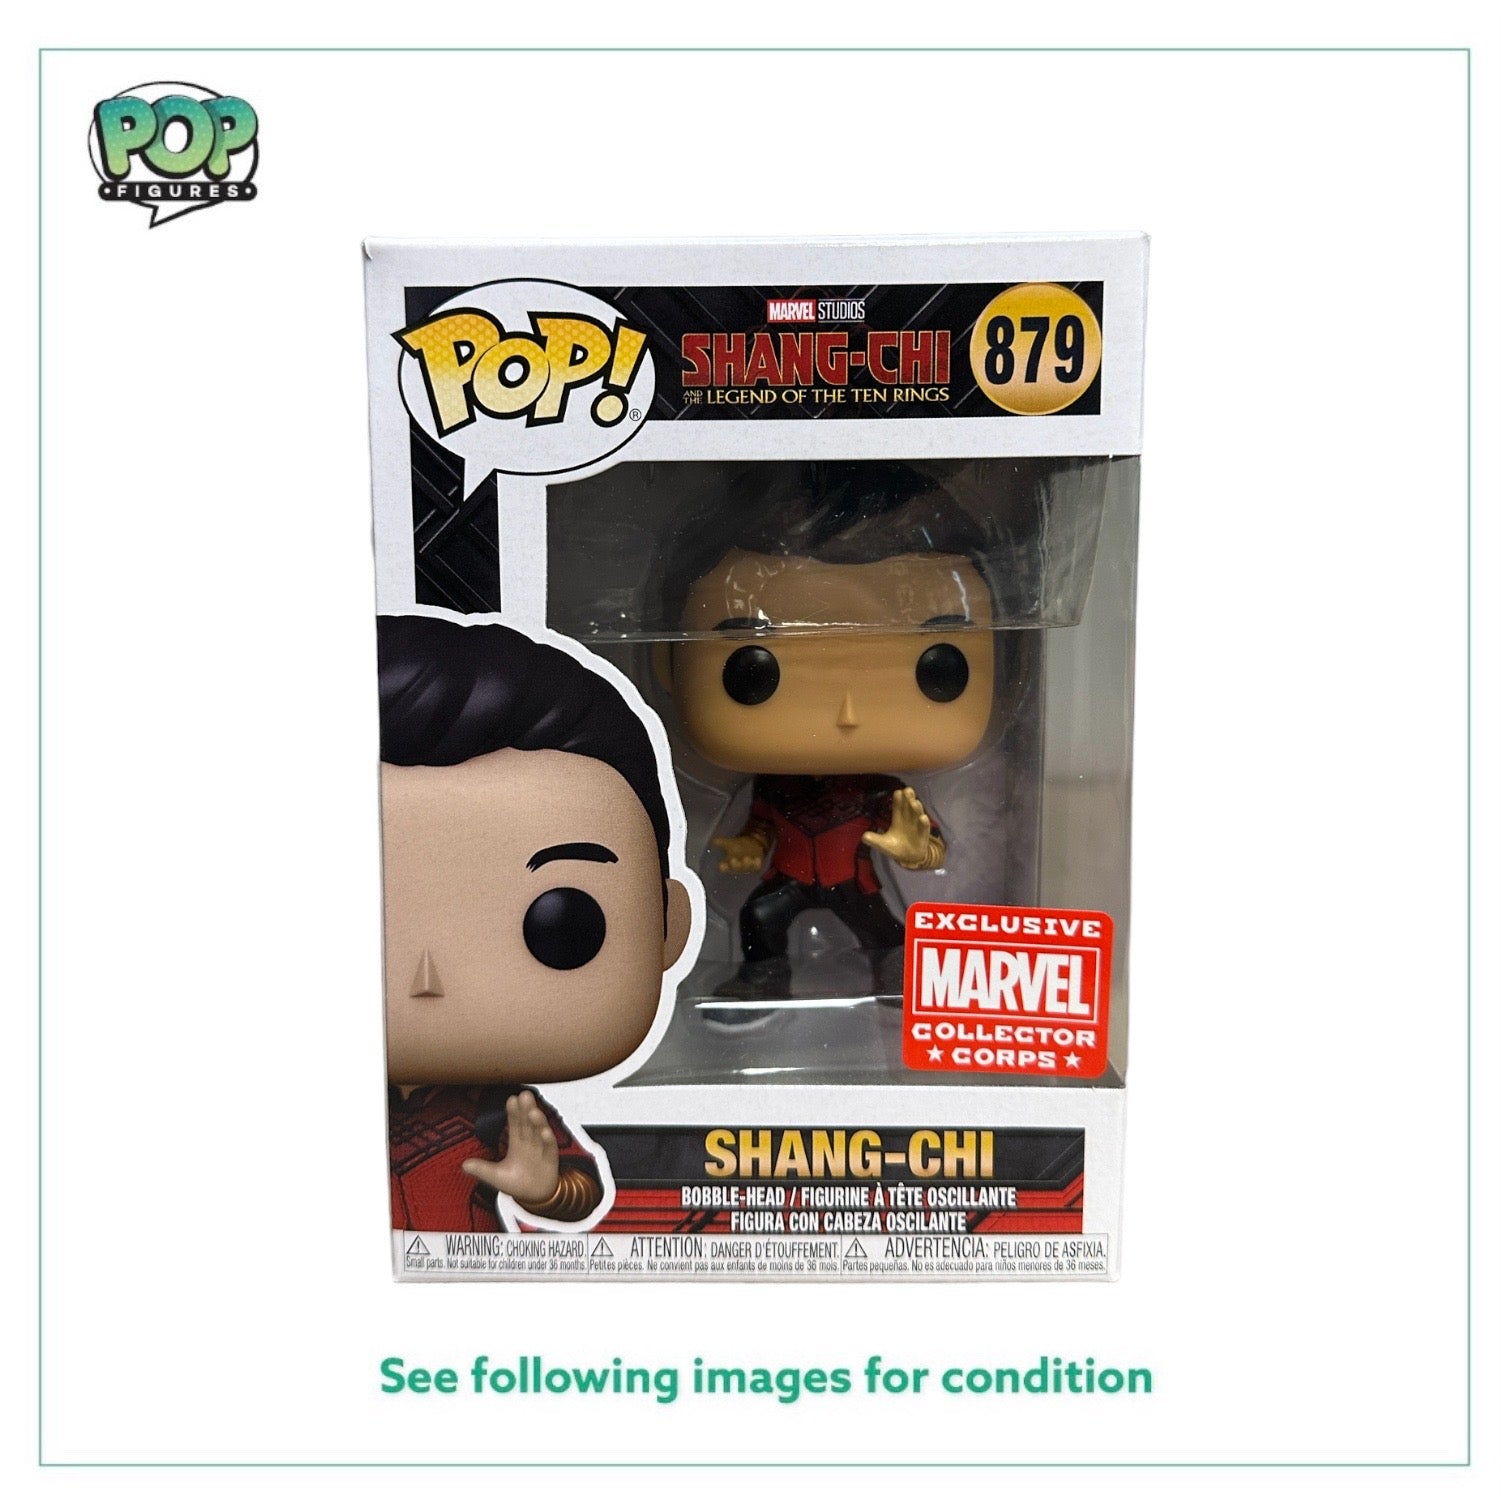 Shang-Chi #879 (w/ Rings) Funko Pop! - Shang-Chi and the Legend of the Ten Rings - Marvel Collector Corps Exclusive - Condition 8.75/10